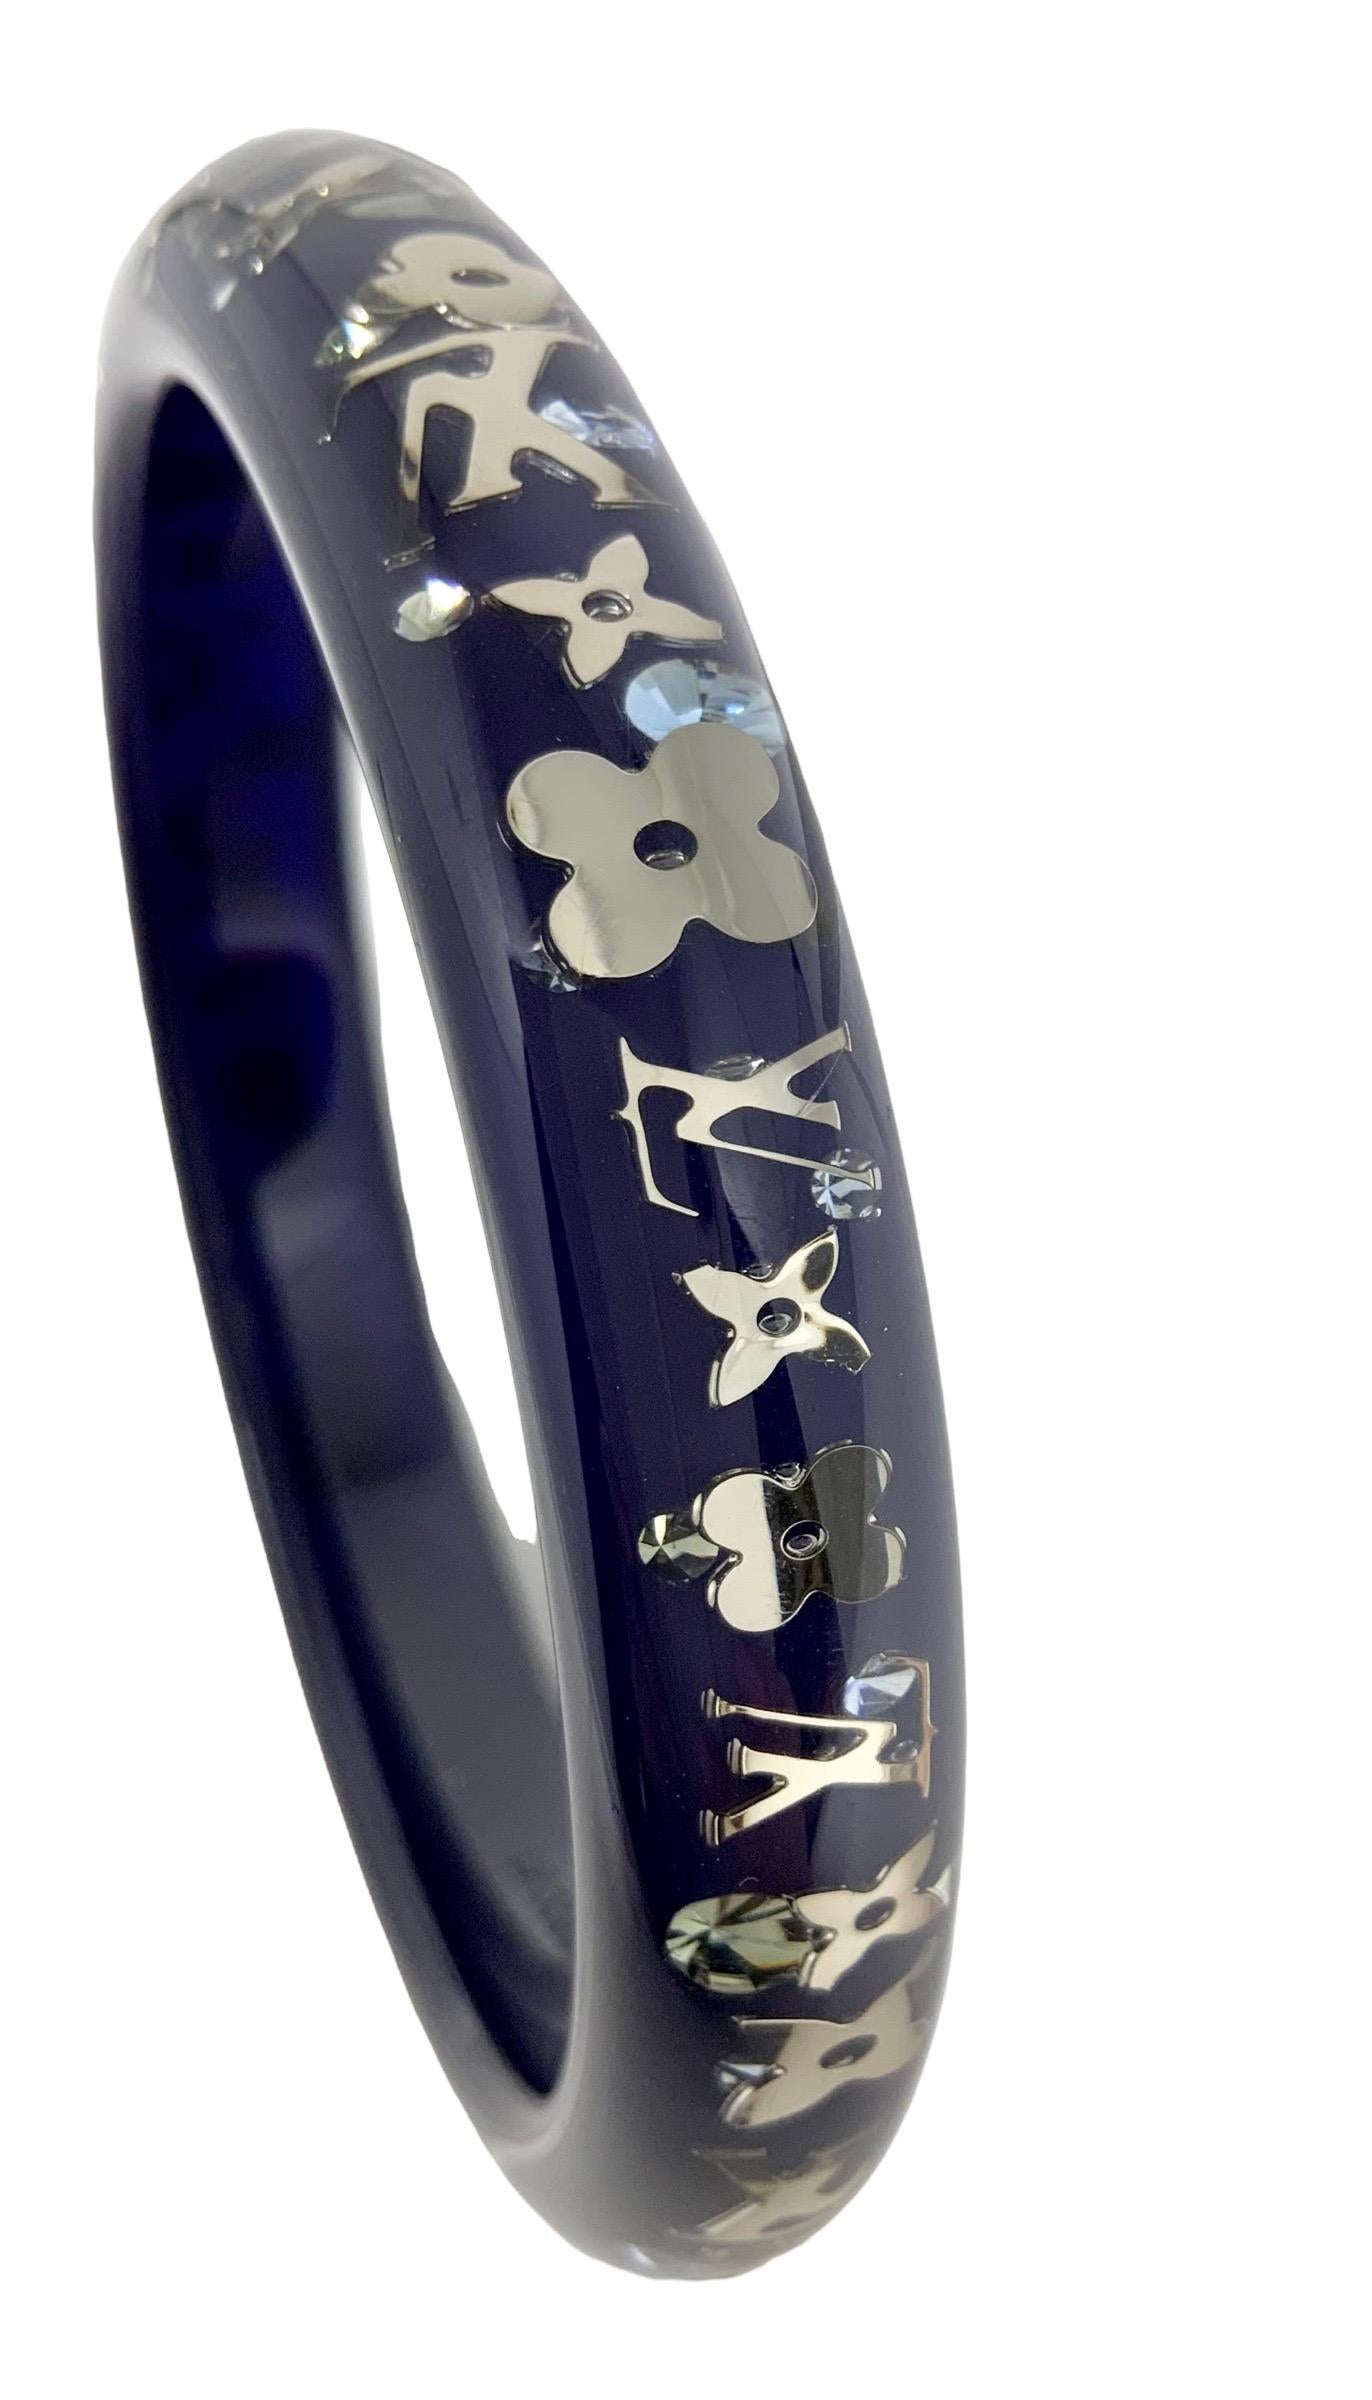 Very nice pre-owned bangle form the Inclusion Monogram collection from Louis Vuitton.
Crafted in a clear resin with blue, silver-tone LV monogram inclusion and Swarovski rhinestones.

Collection: Inclusion Monogram
Color: Blue and silver-tone